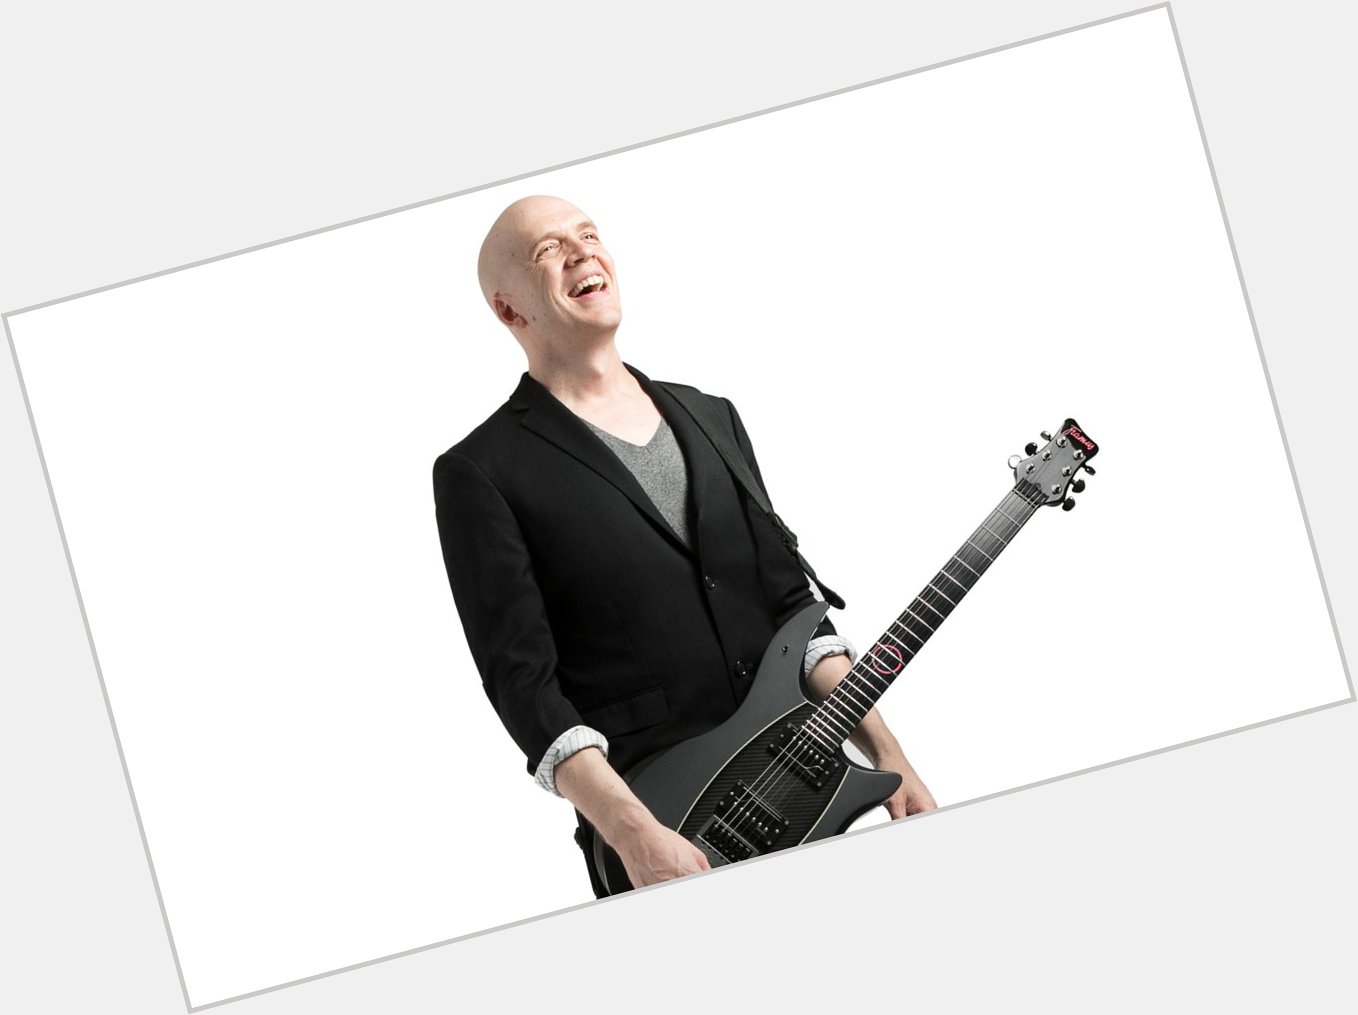  A Very Happy Birthday to Mr Devin Townsend from the Warwick & Framus Family  